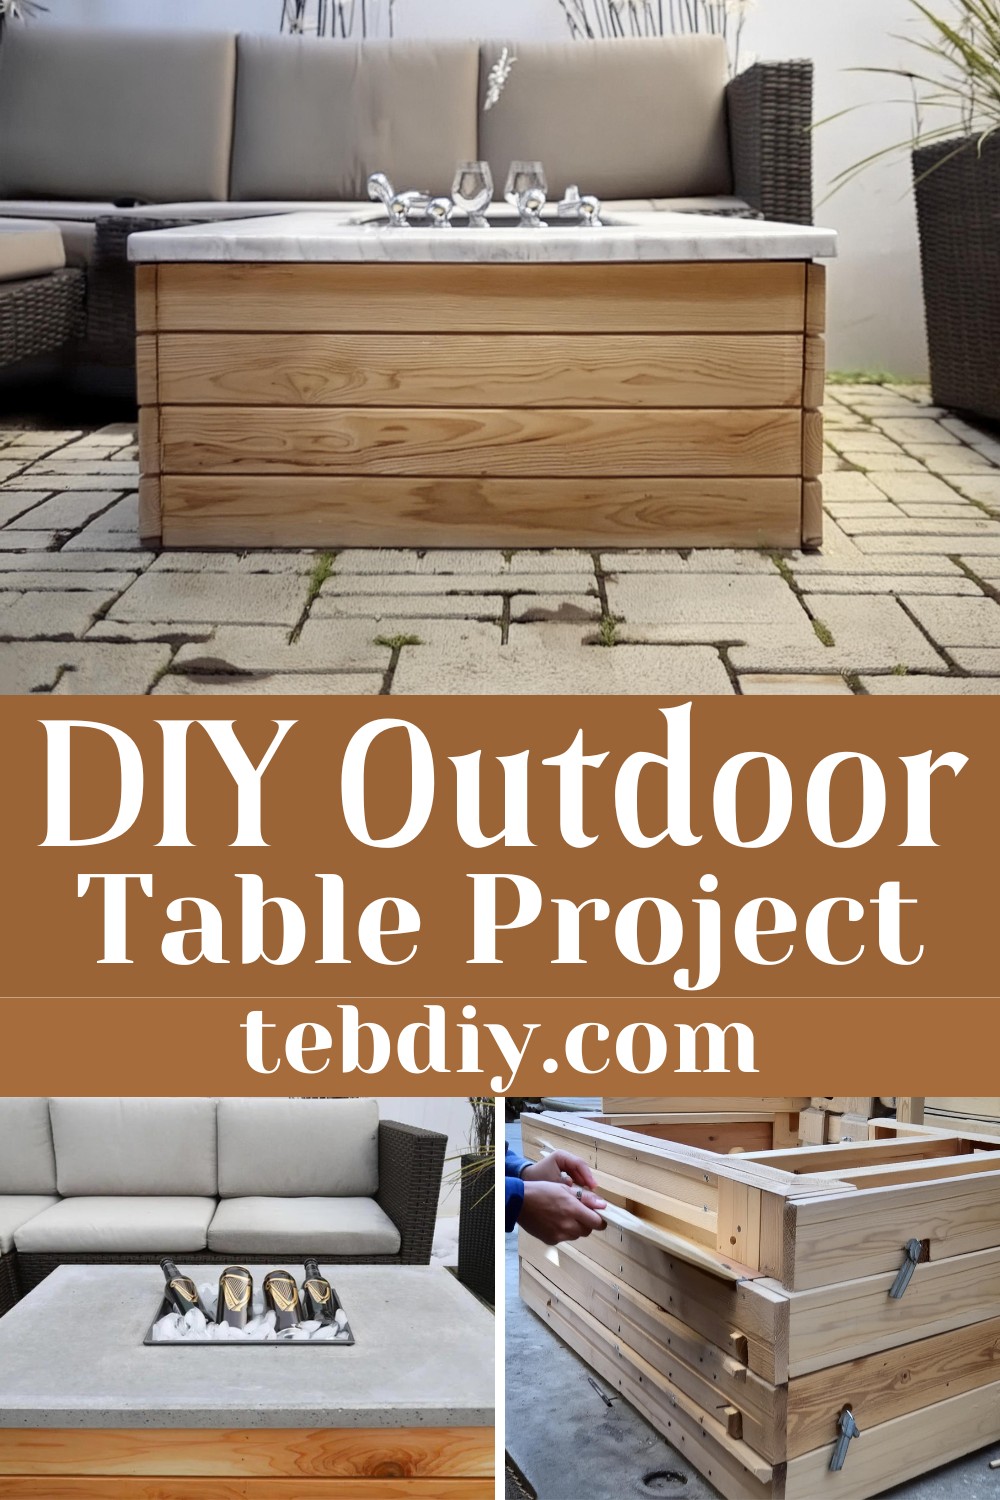 DIY Outdoor Table Project